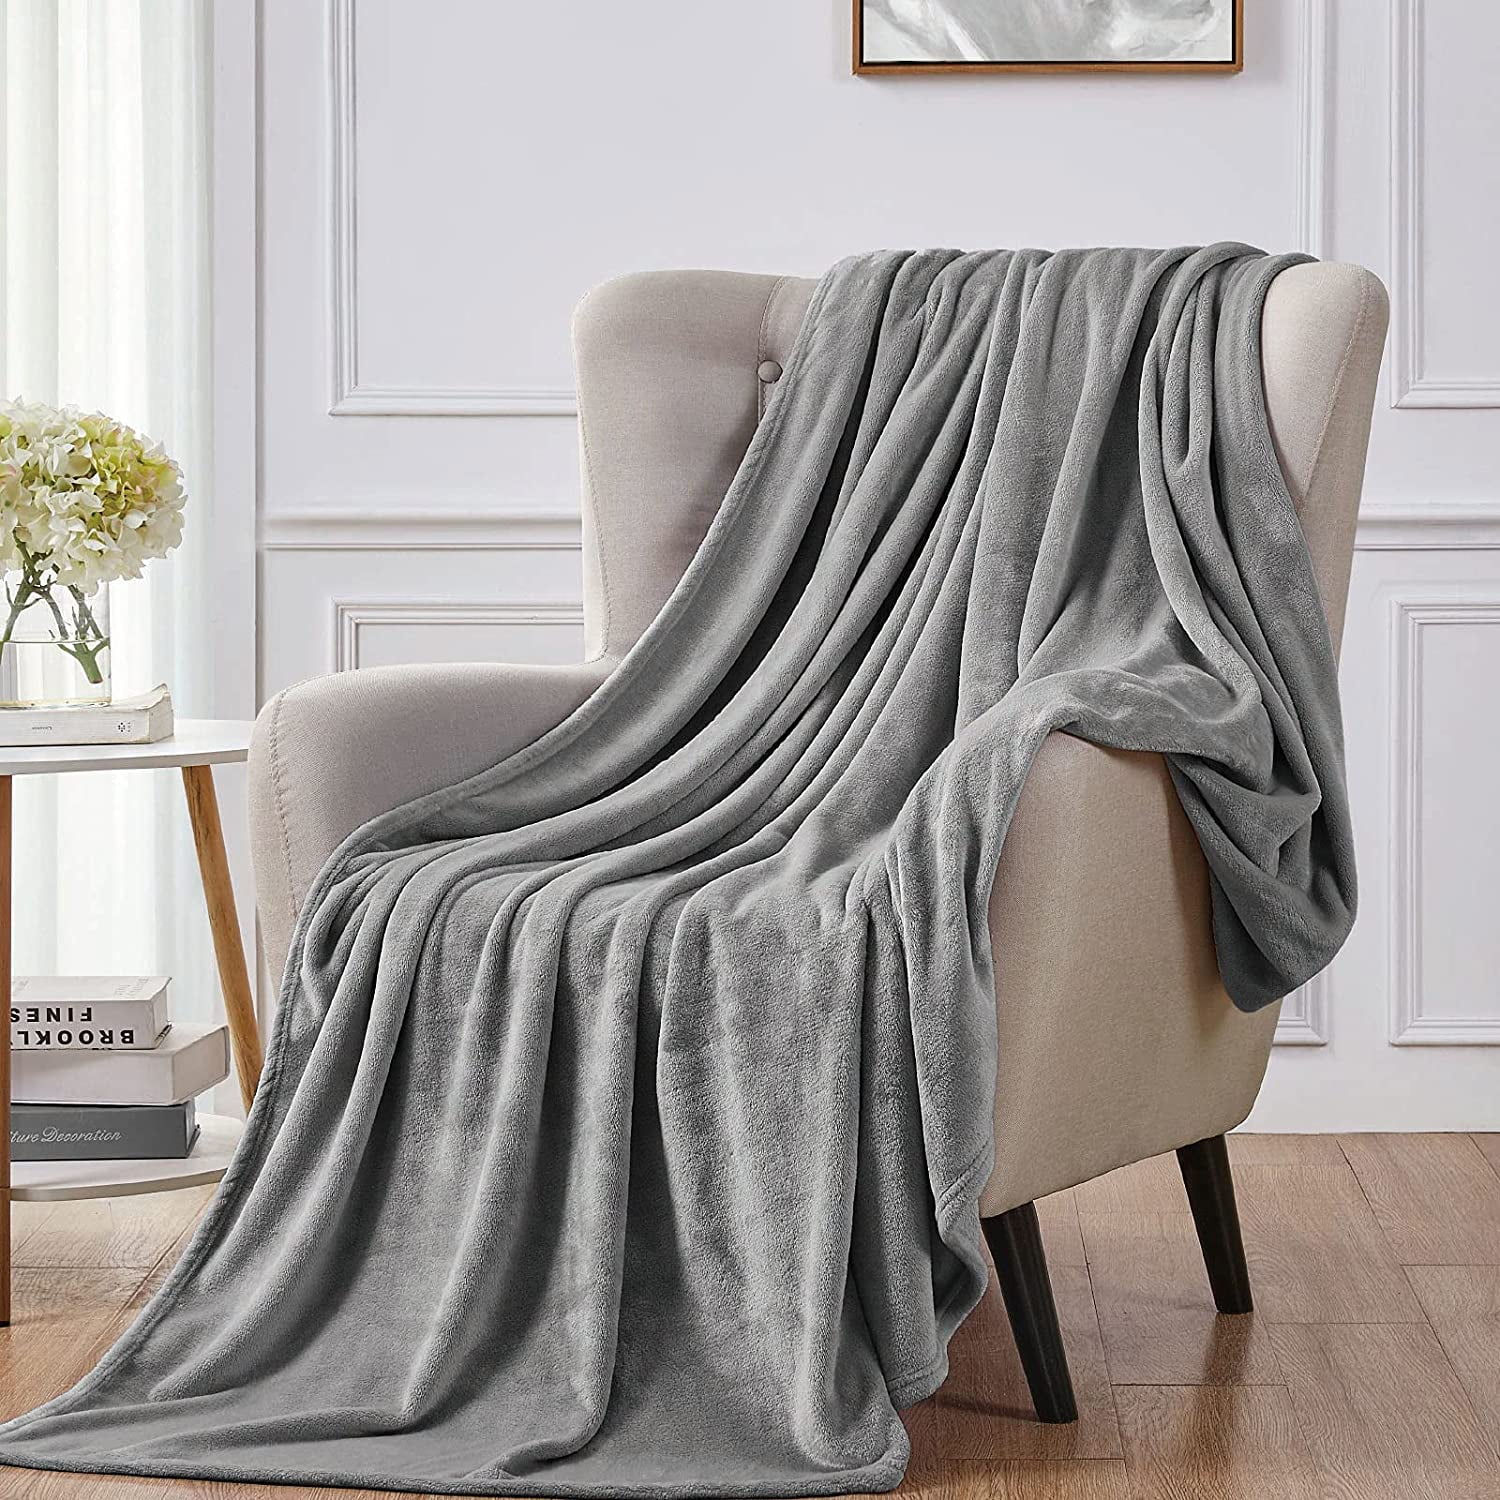 Gray, King 108x90 Flannel Blanket Fleece Throw King Size Gray Color All Season Lightweight Plush Cozy Super Soft Luxury Couch Sofa Bed Blanket 